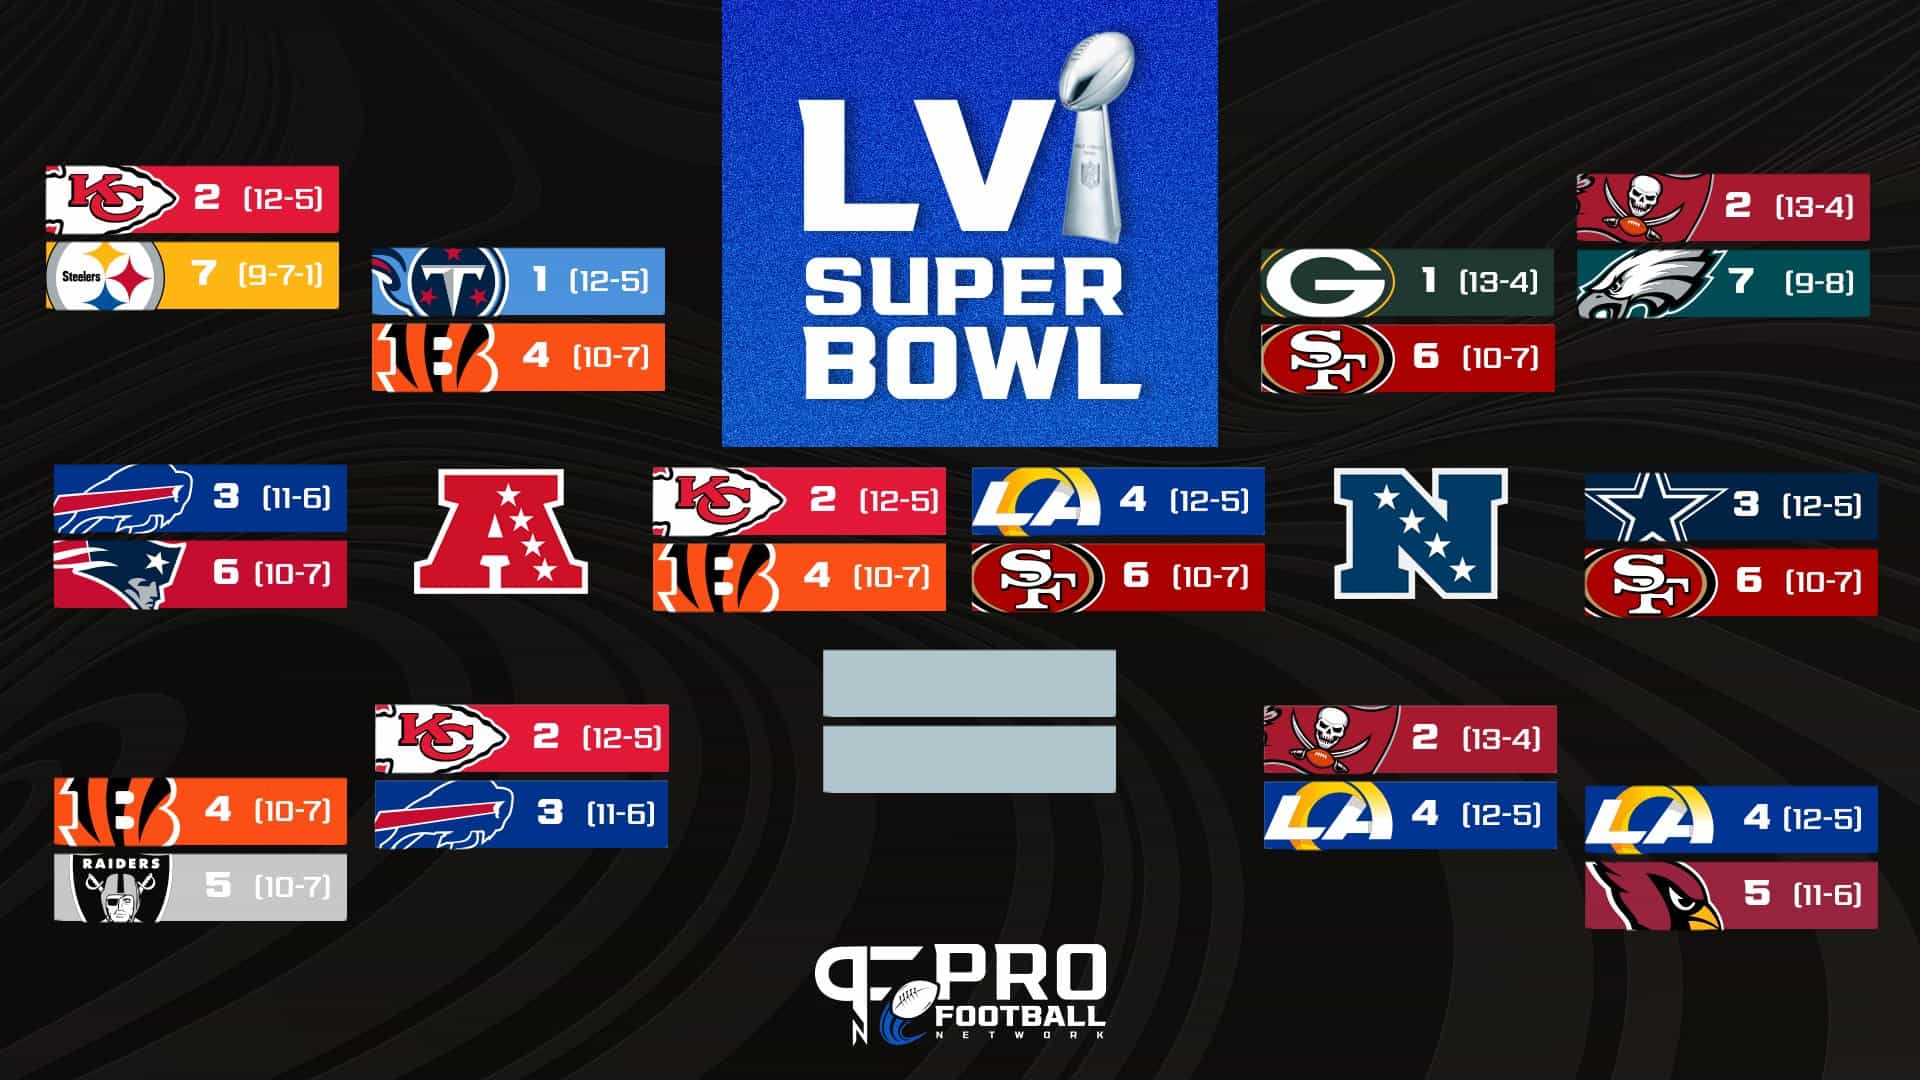 NFL Playoff Bracket Divisional Round: Schedule, matchups for this